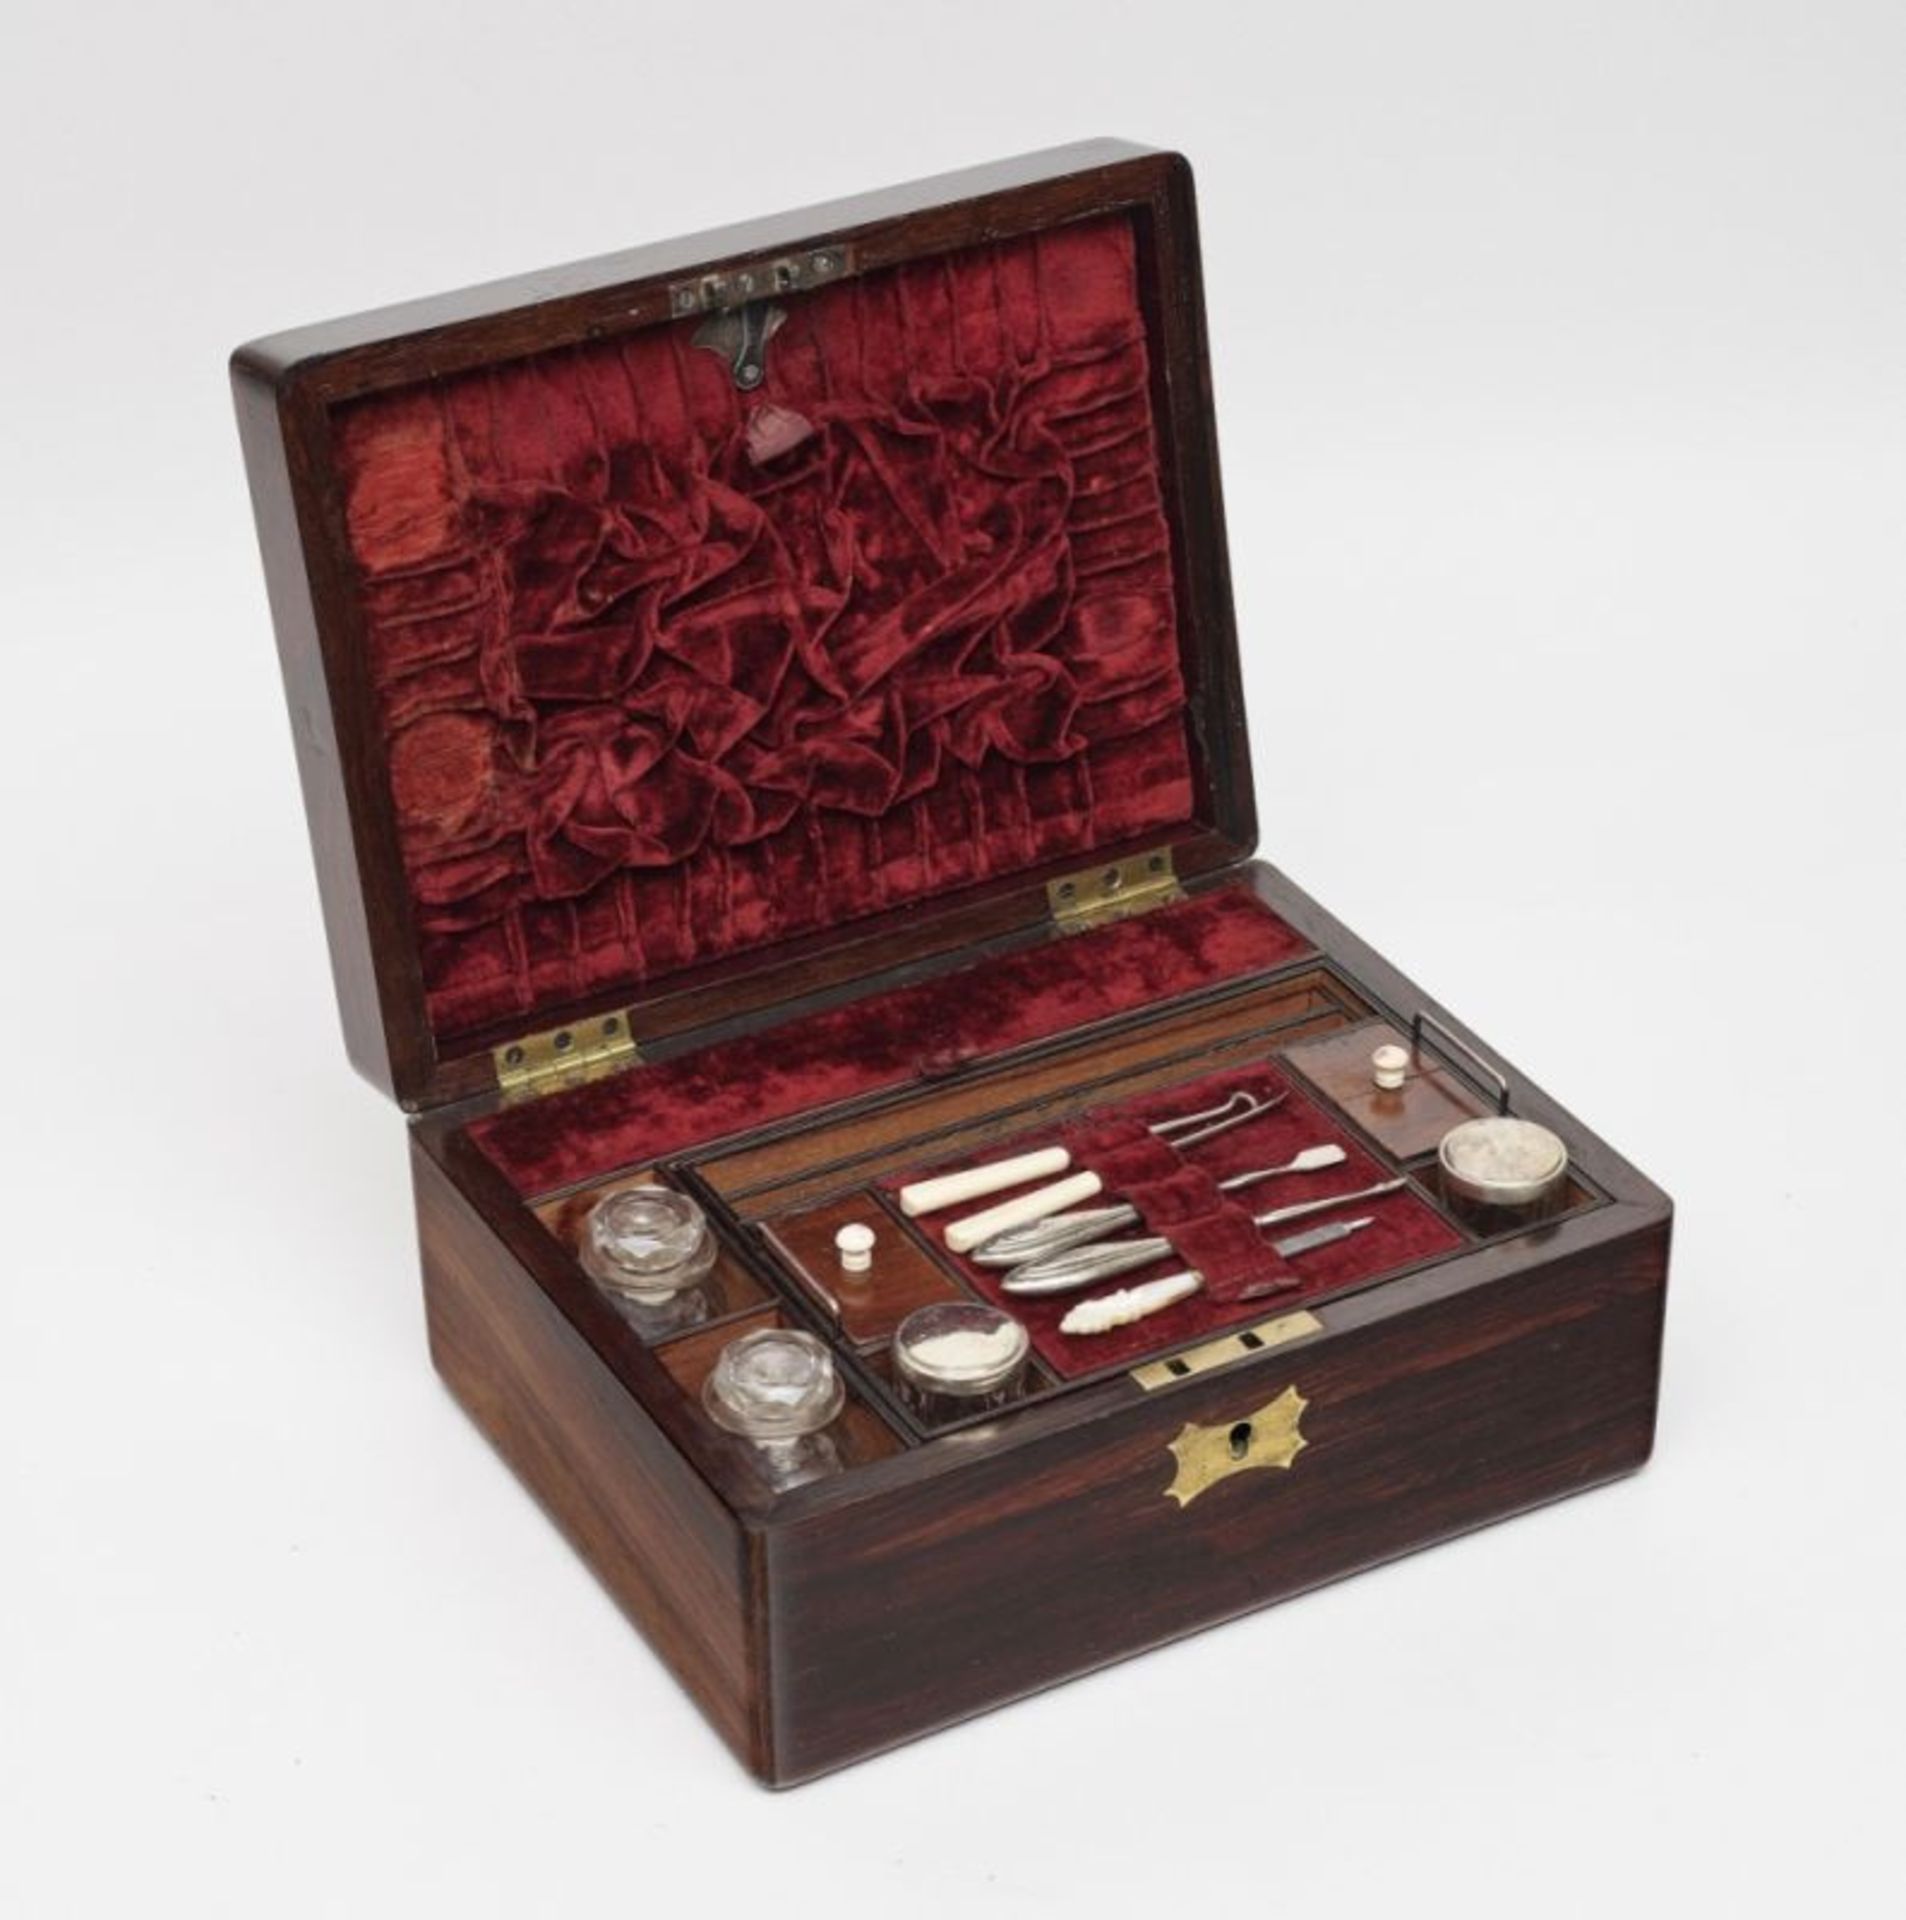 Gentleman's Dressing Case19th Century Rosewood case with red velvet lining. Upper side of lid with